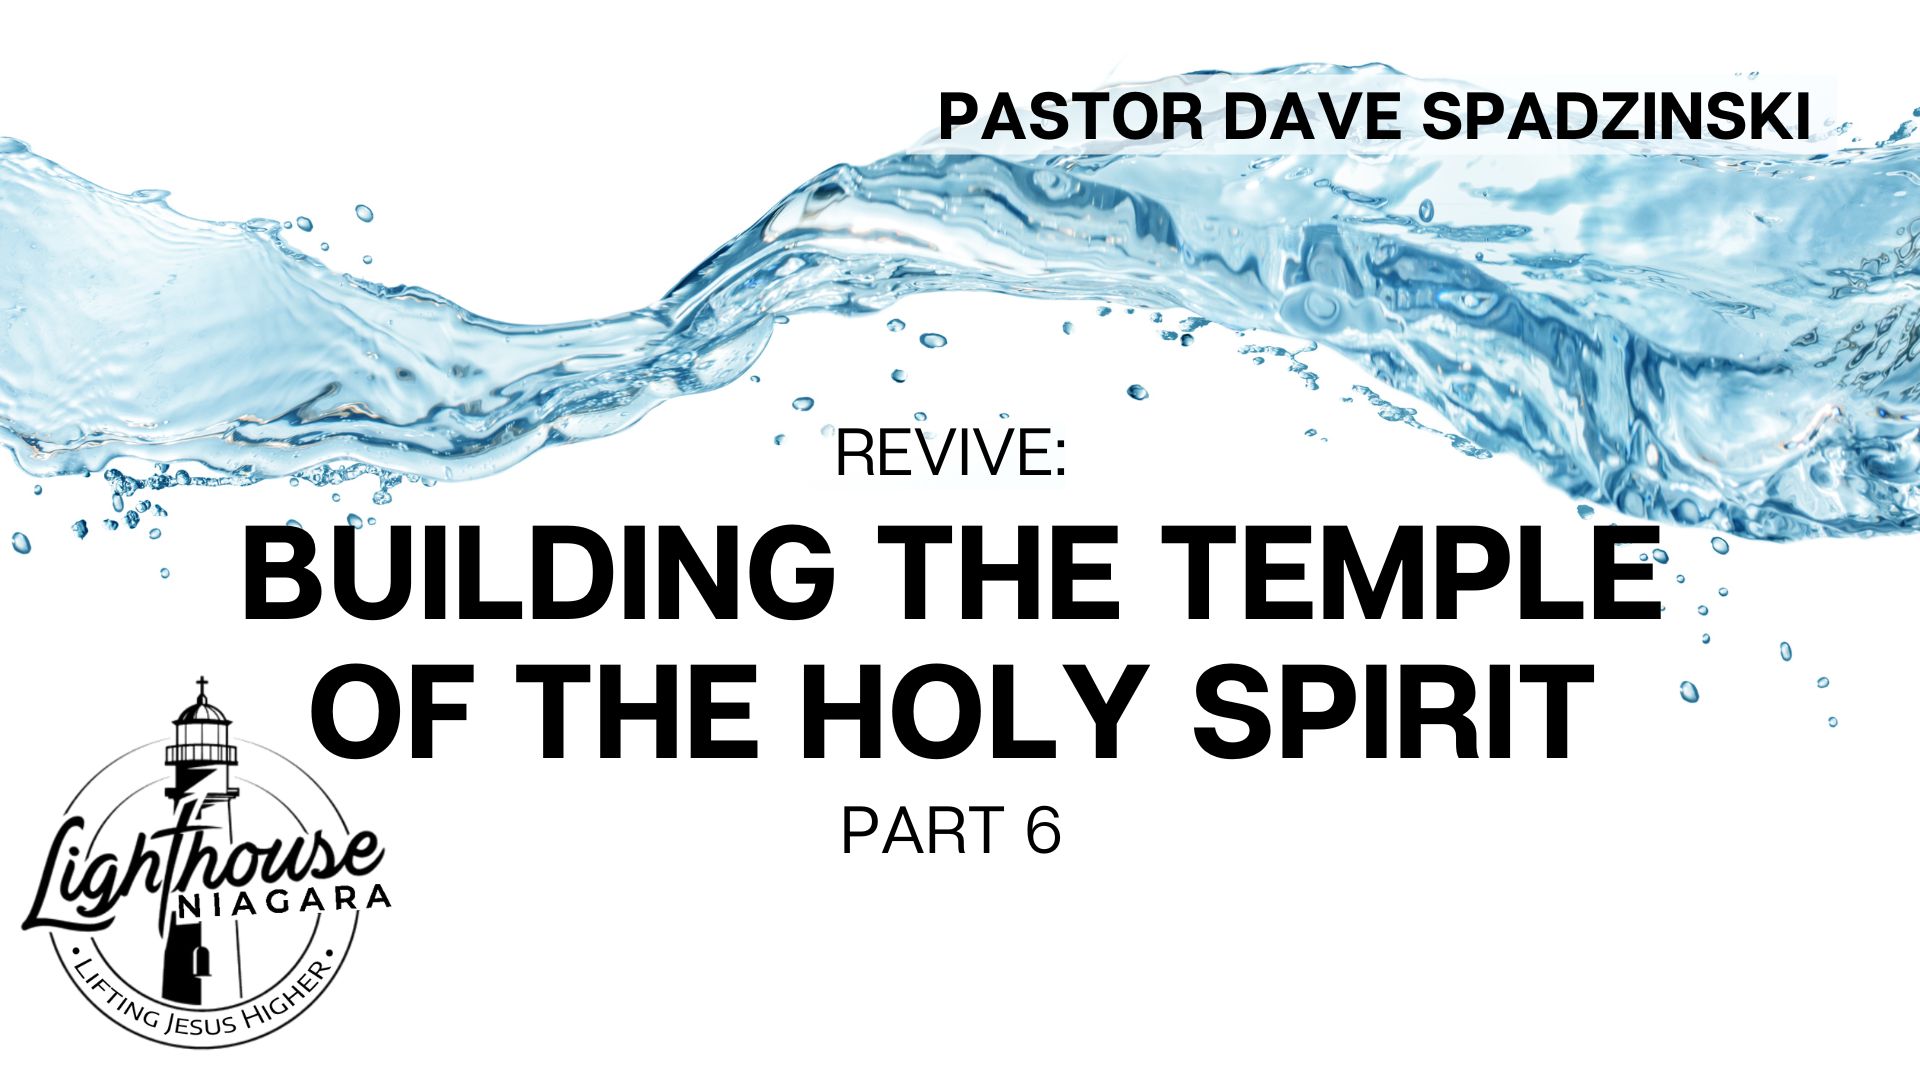 Revive: Building The Temple Of The Holy Spirit - Pastor Dave Spadzinski